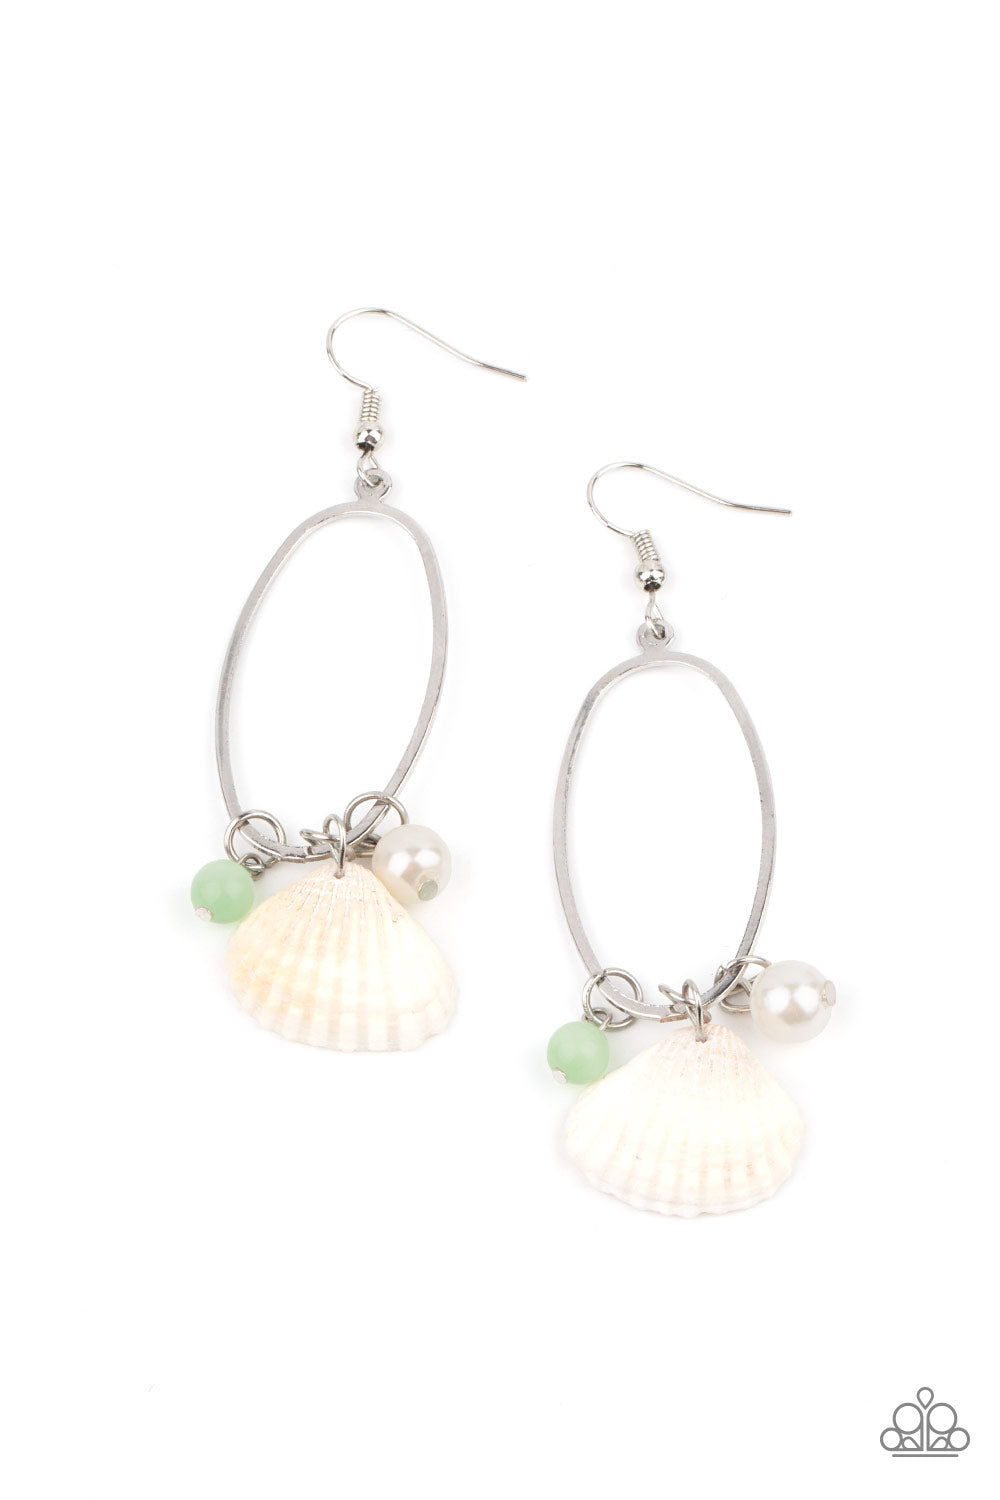 This Too SHELL Pass - Green - Paparazzi Earrings